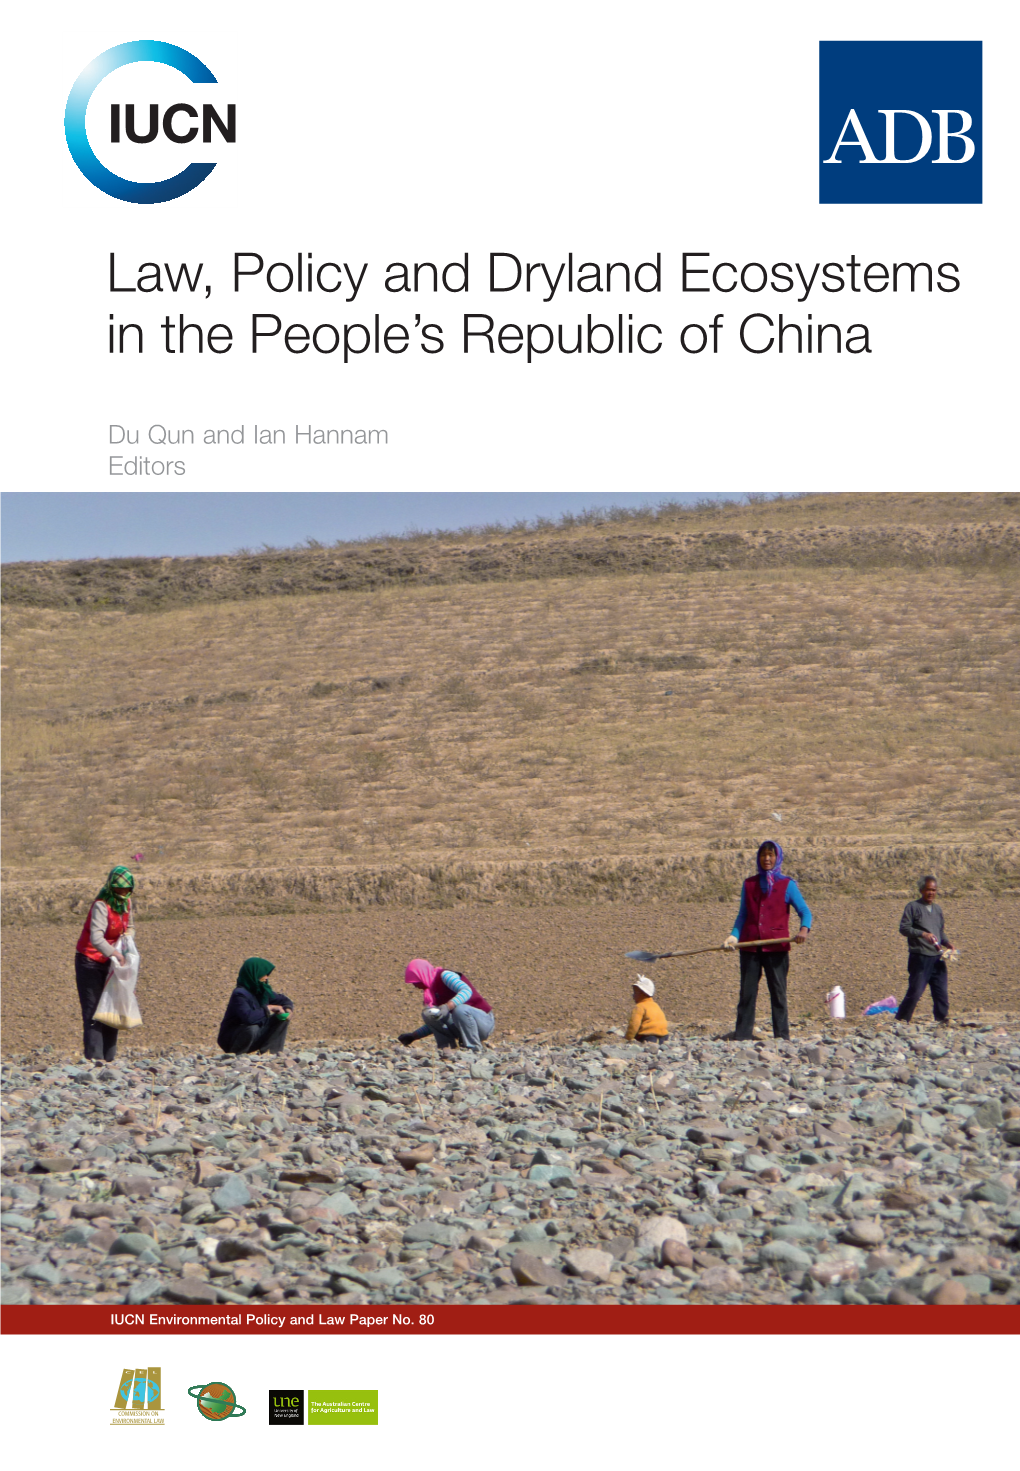 Law, Policy and Dryland Ecosystems in the People's Republic of China